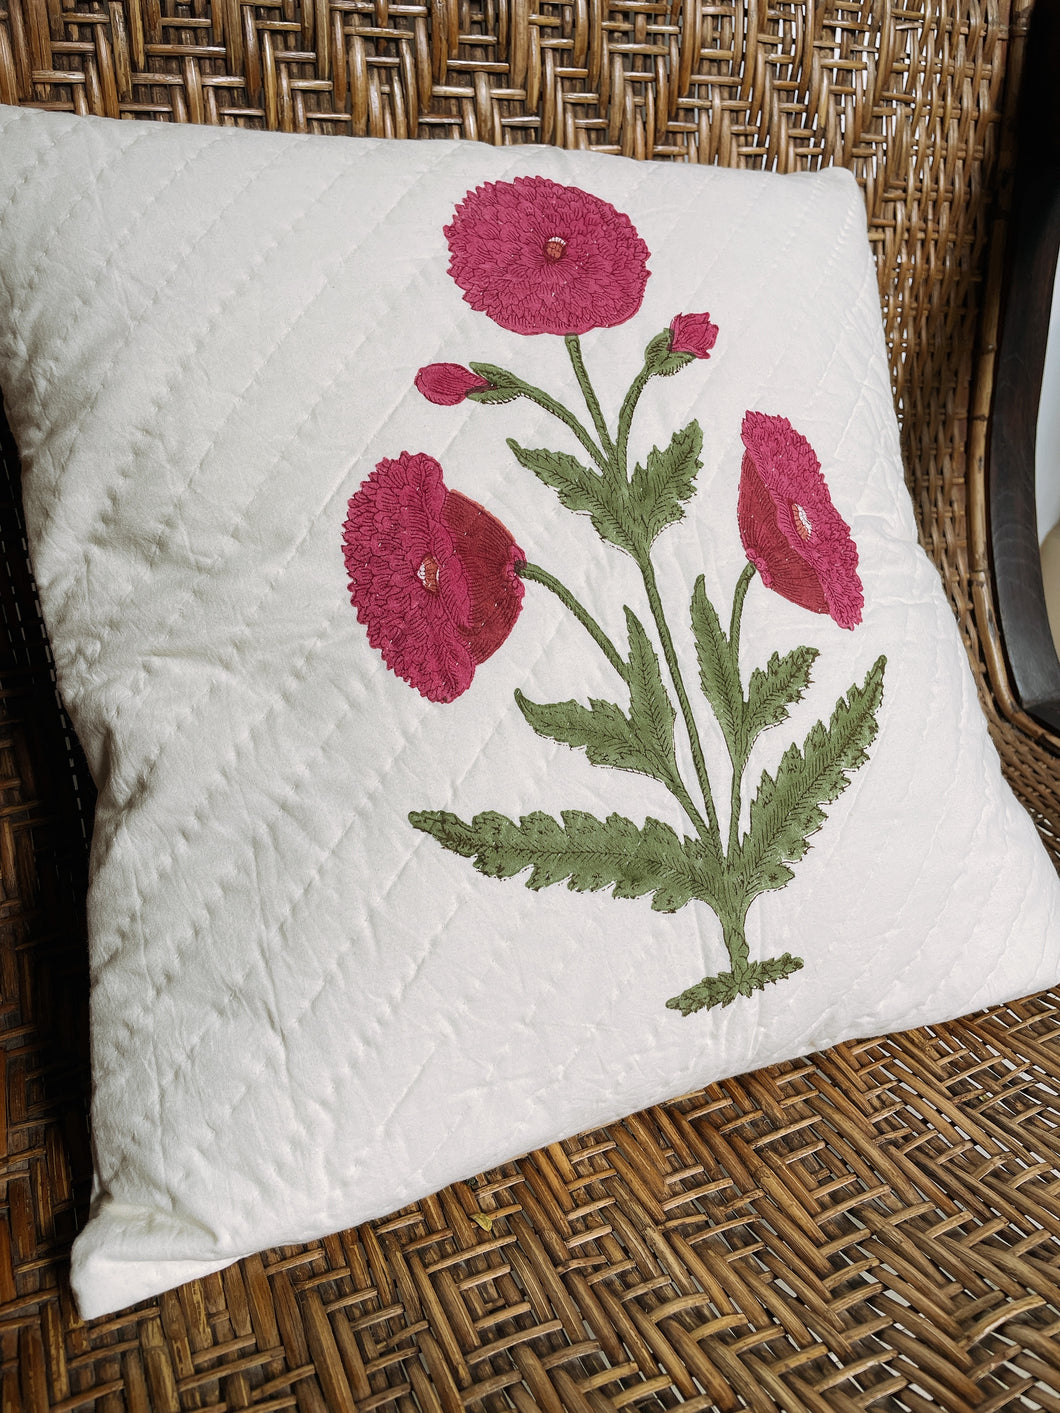 Mughal poppy cushions - 16”x16” - hand quilted